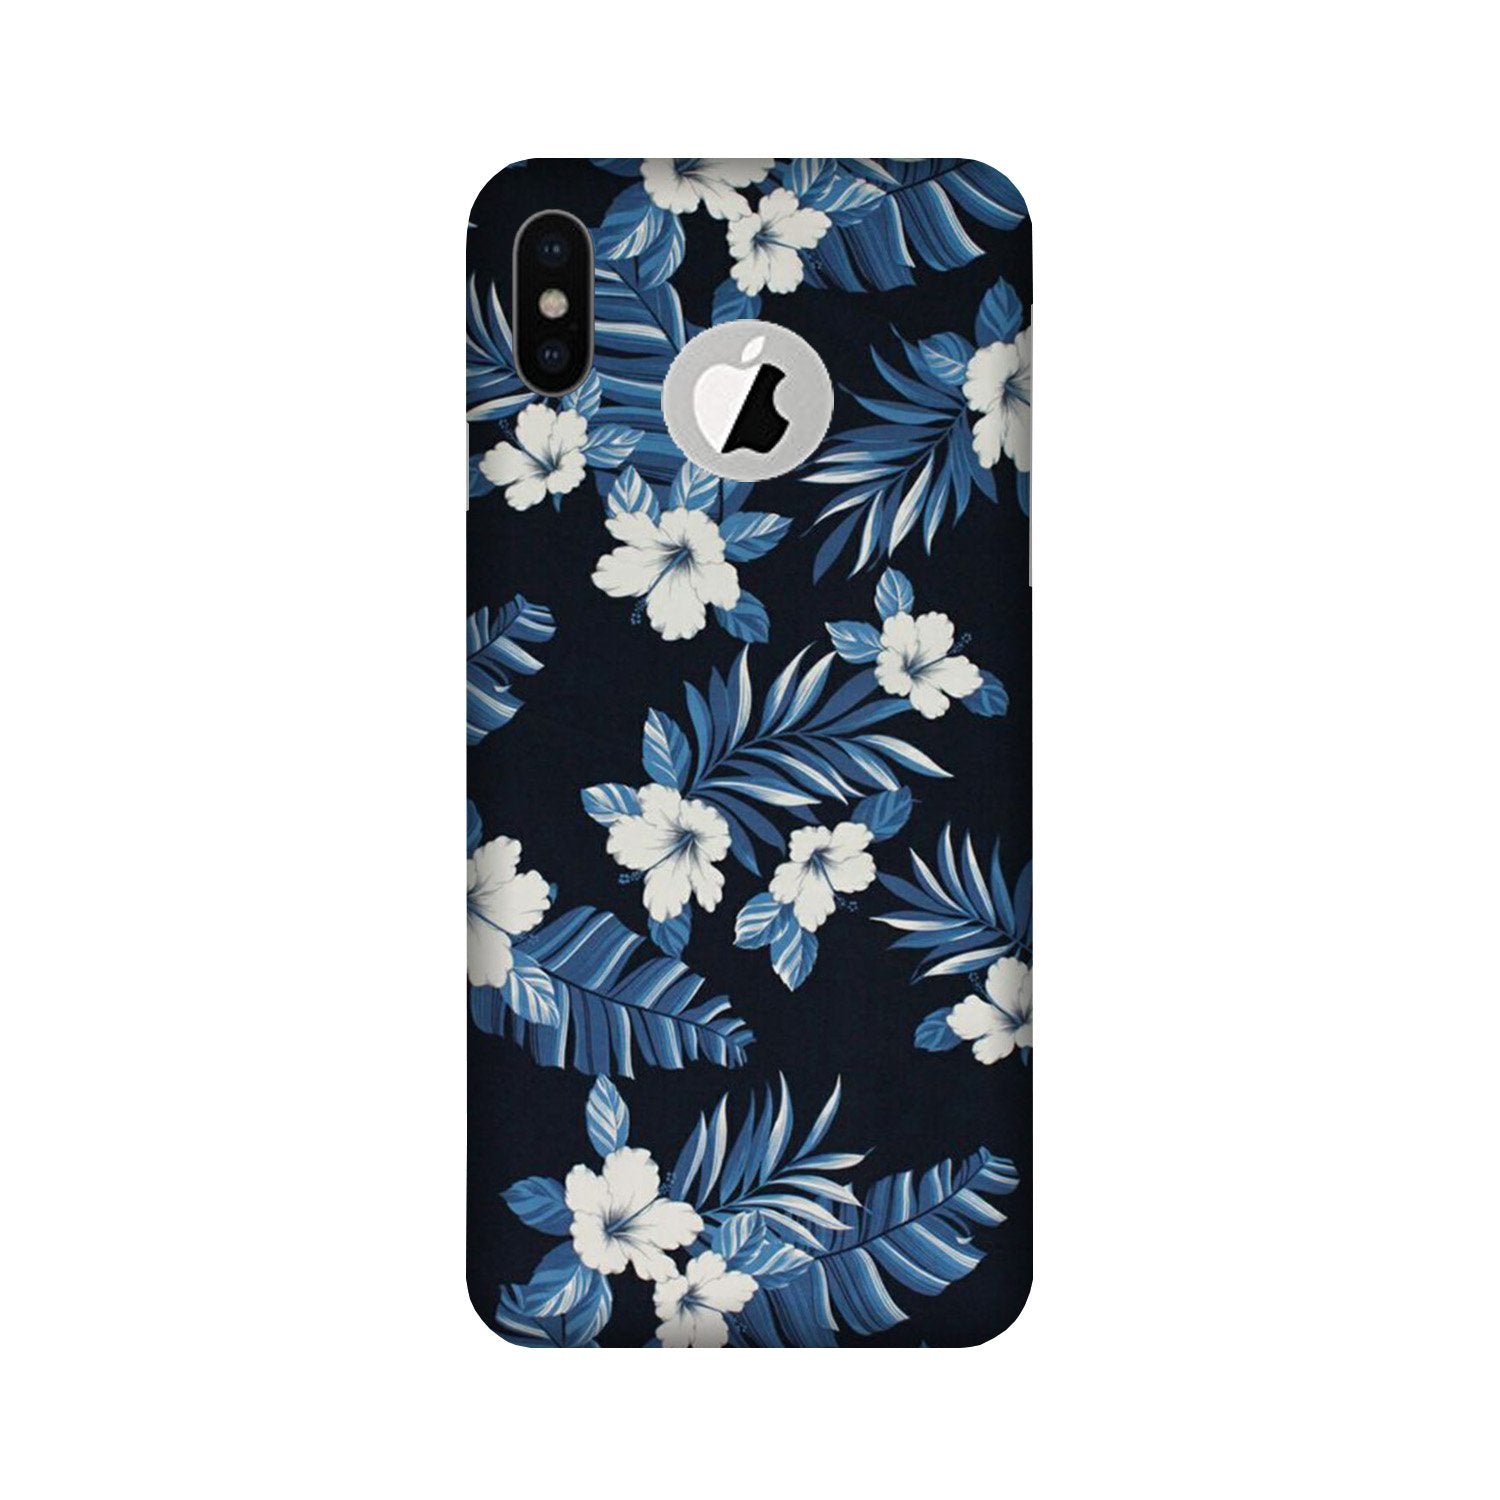 White flowers Blue Background2 Case for iPhone Xs logo cut 